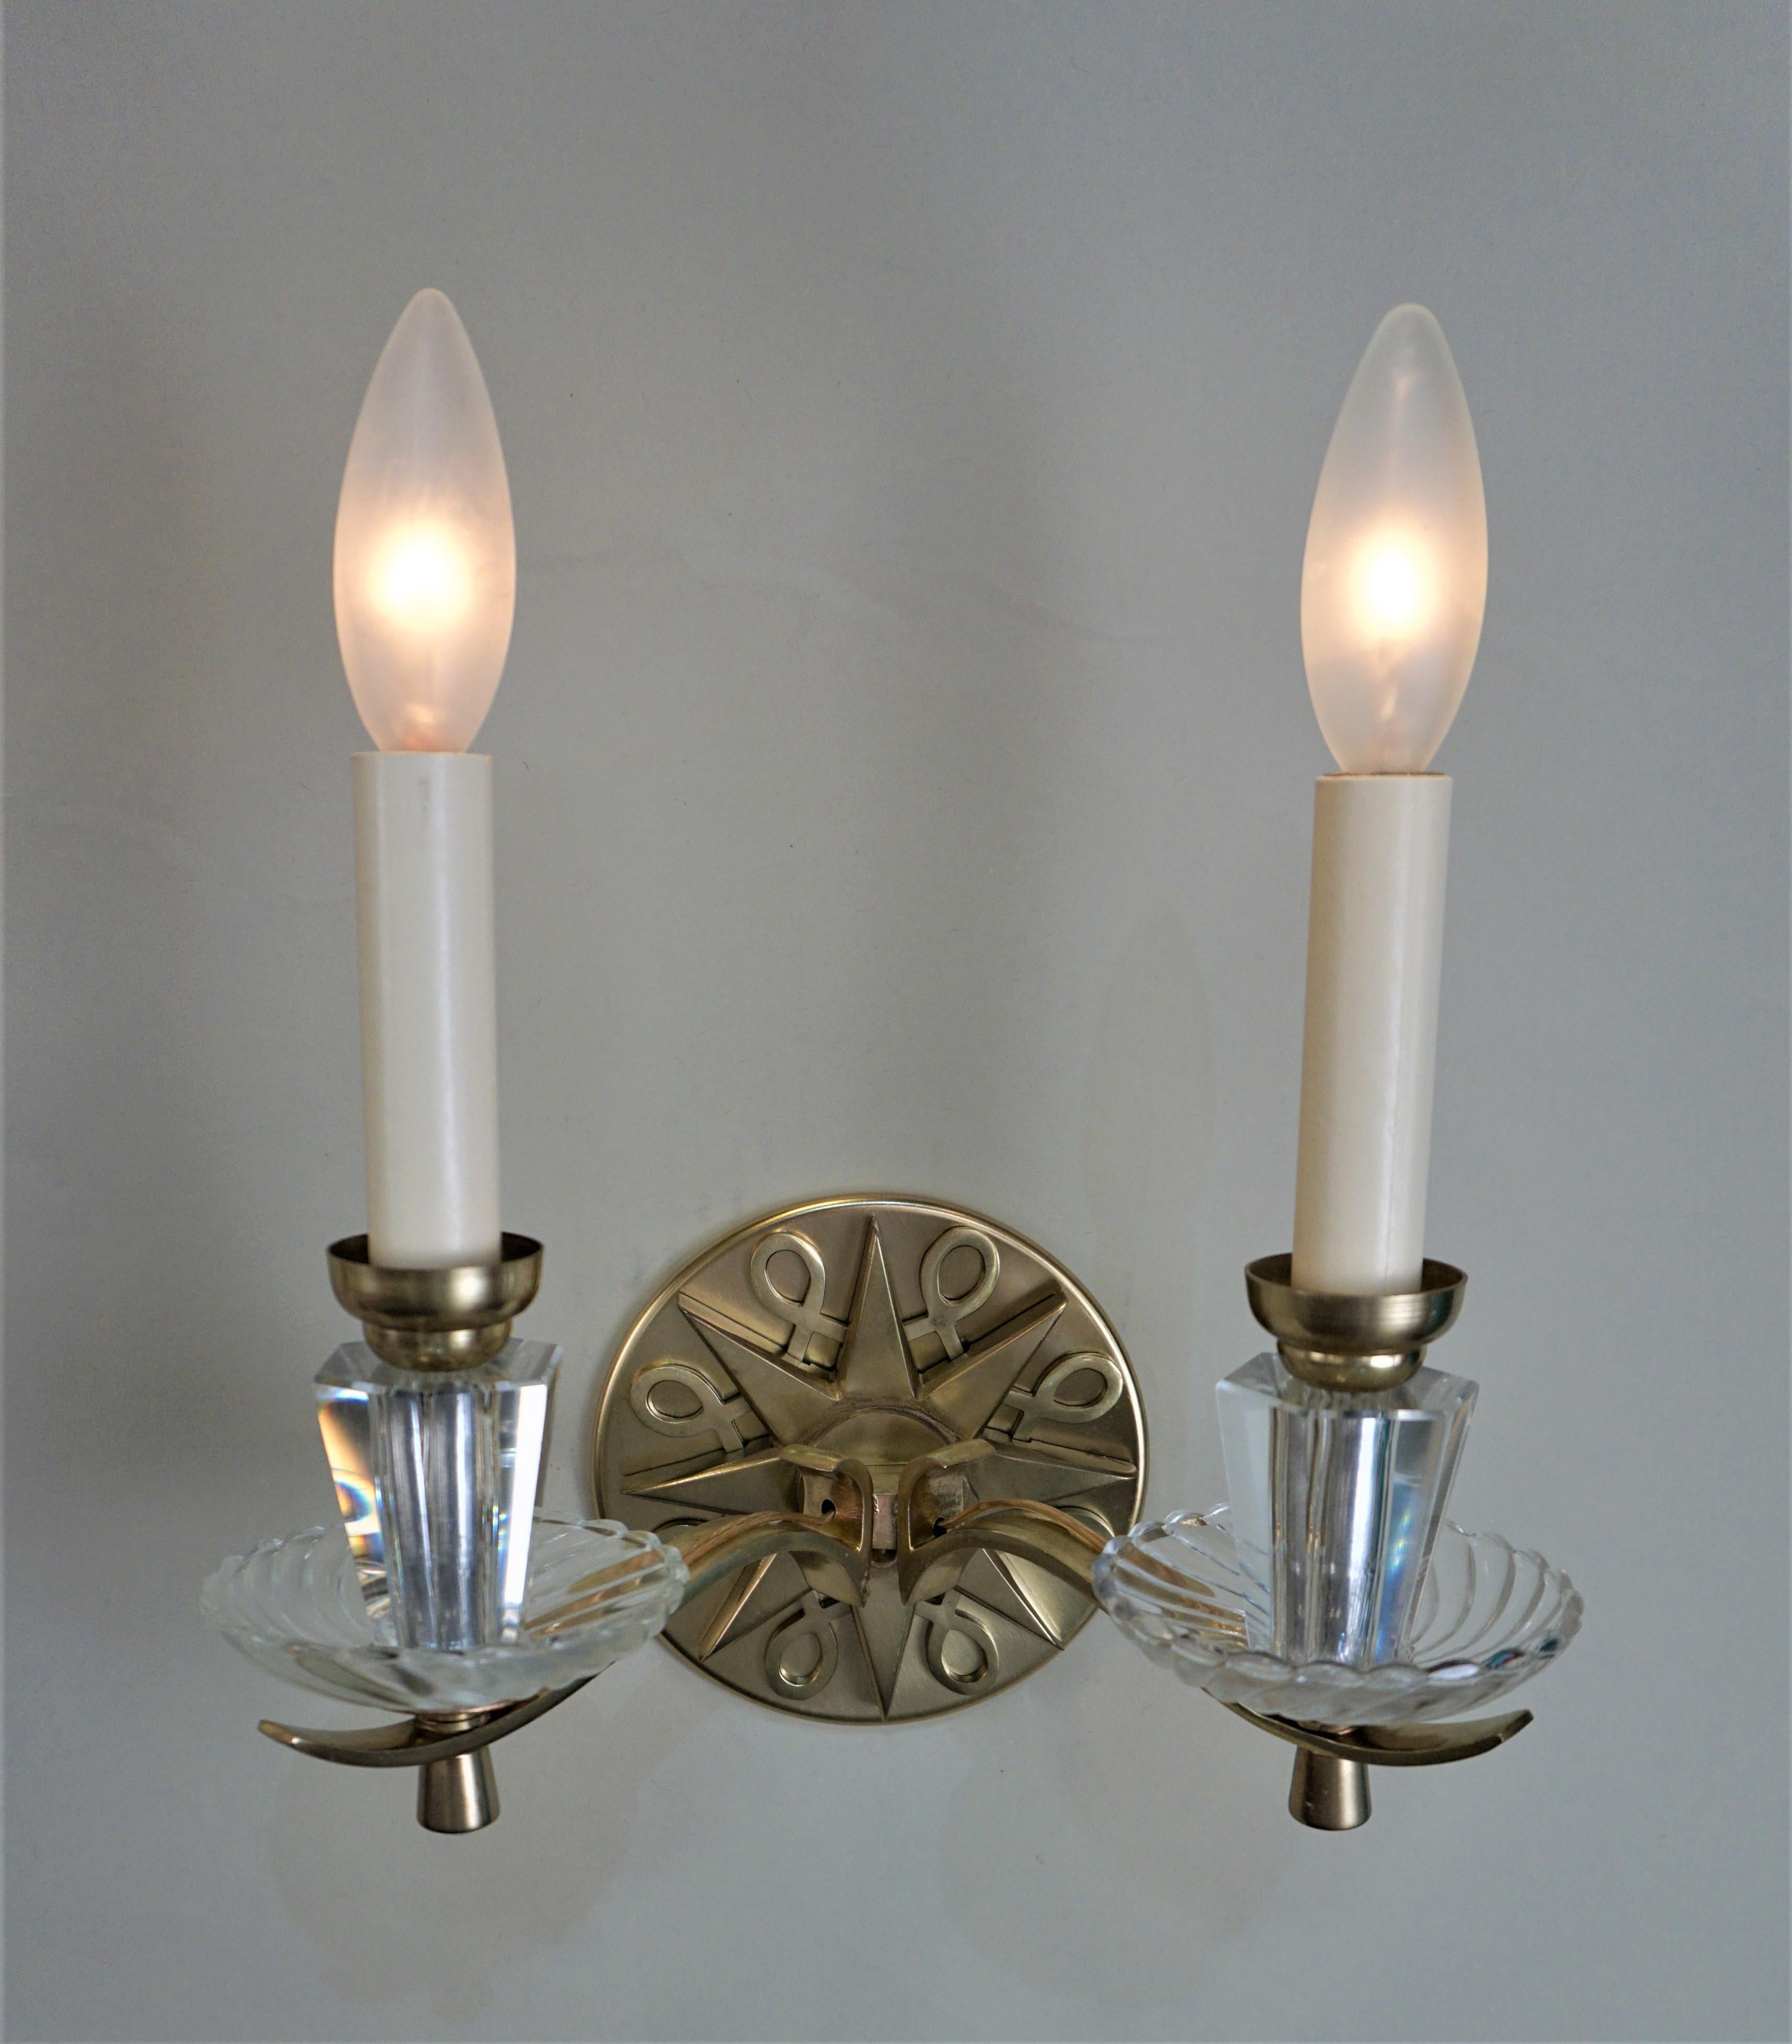 Pair of double arm 1950s bronze wall sconces.